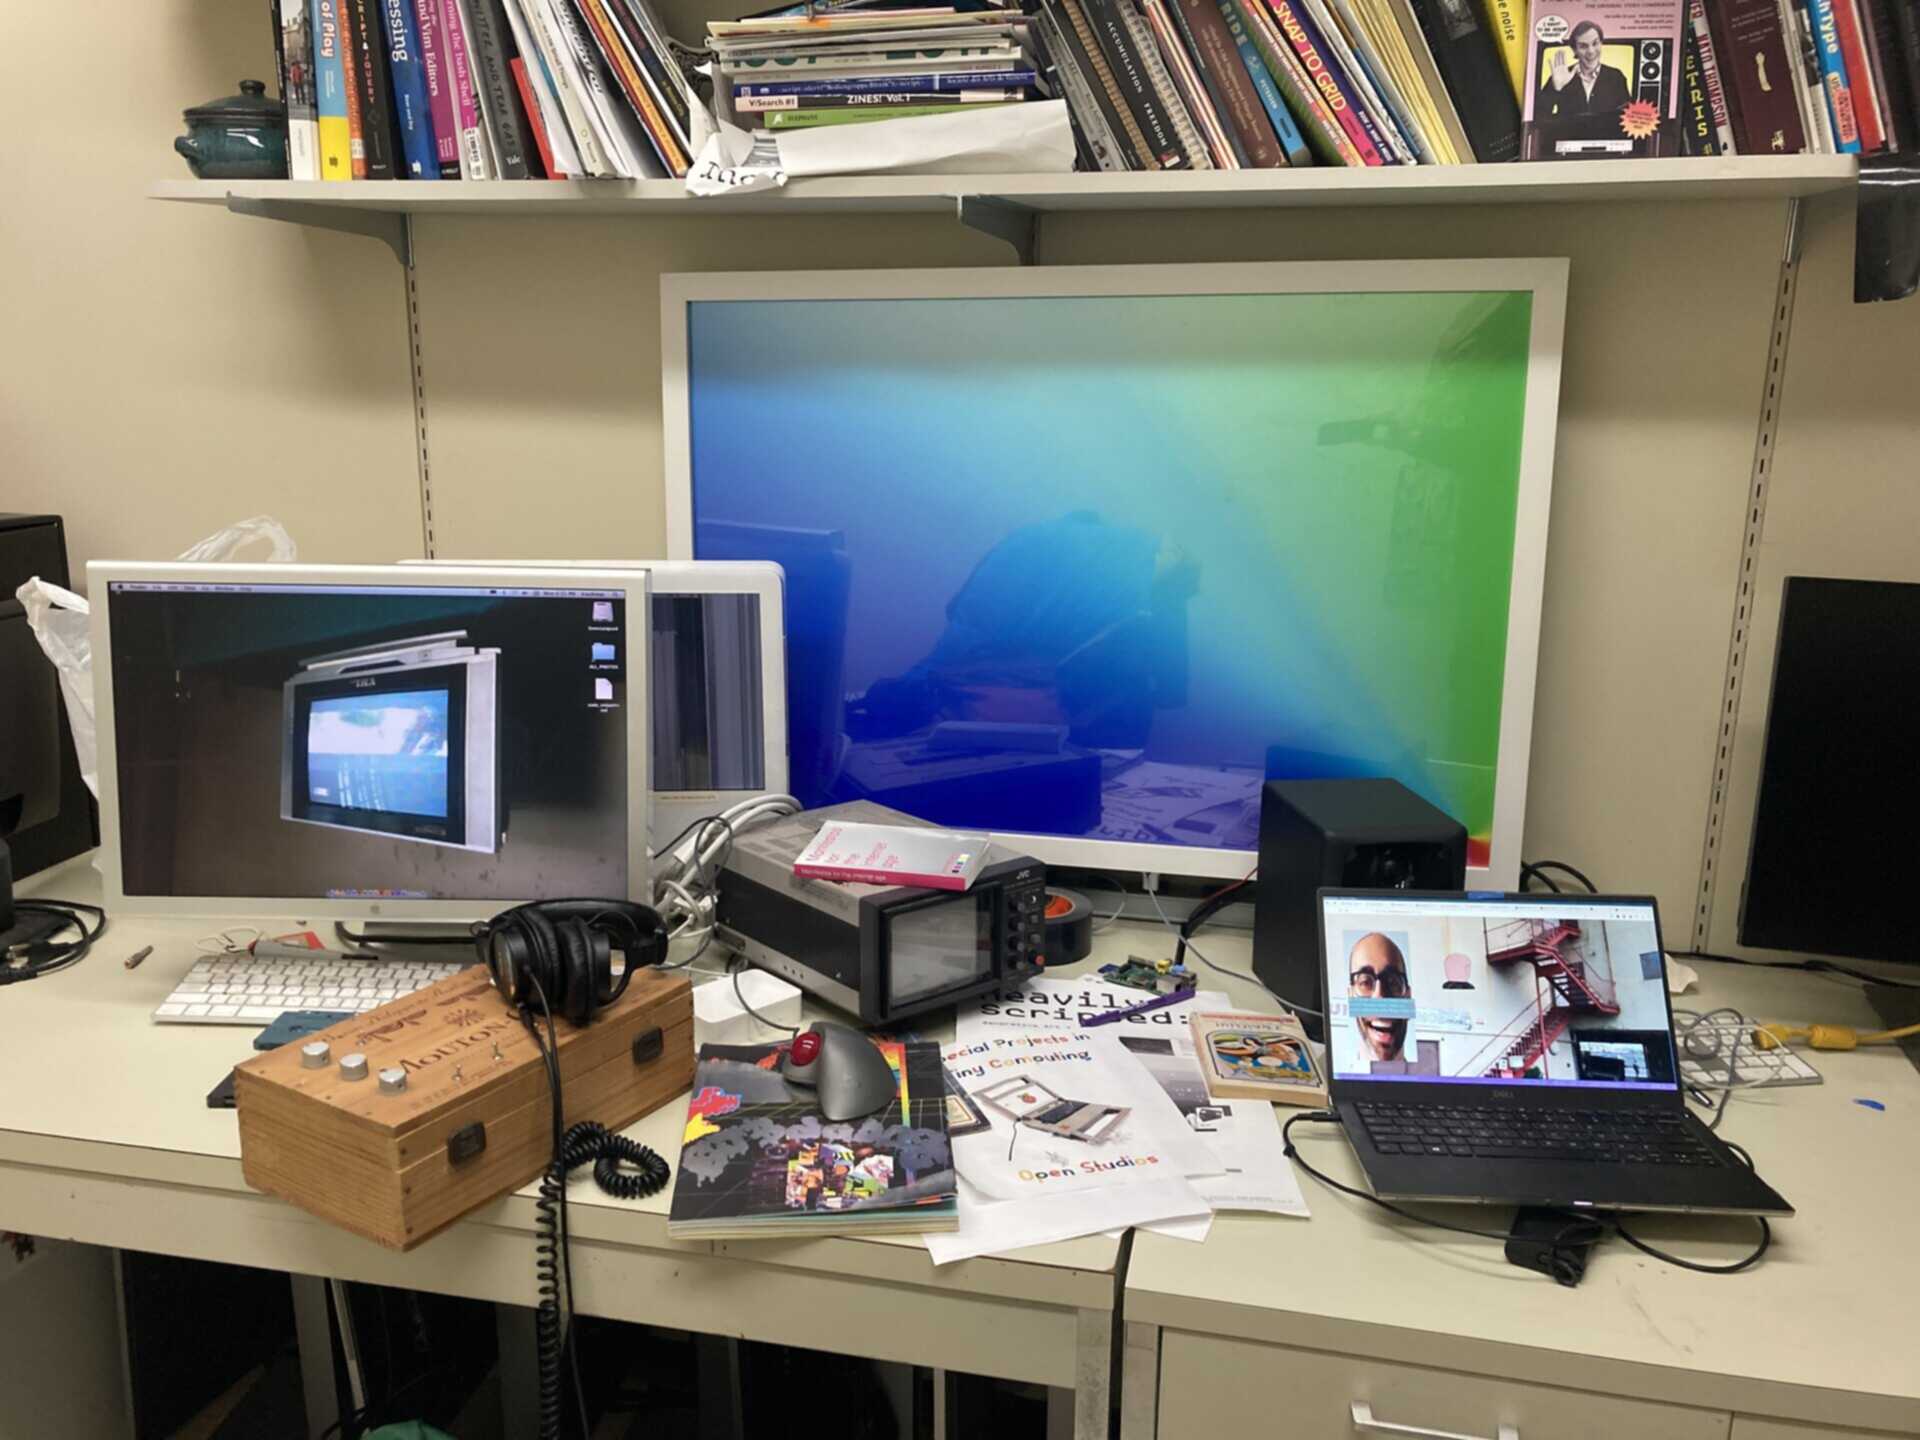 My messy desk with gaussian blur and 50% image quality